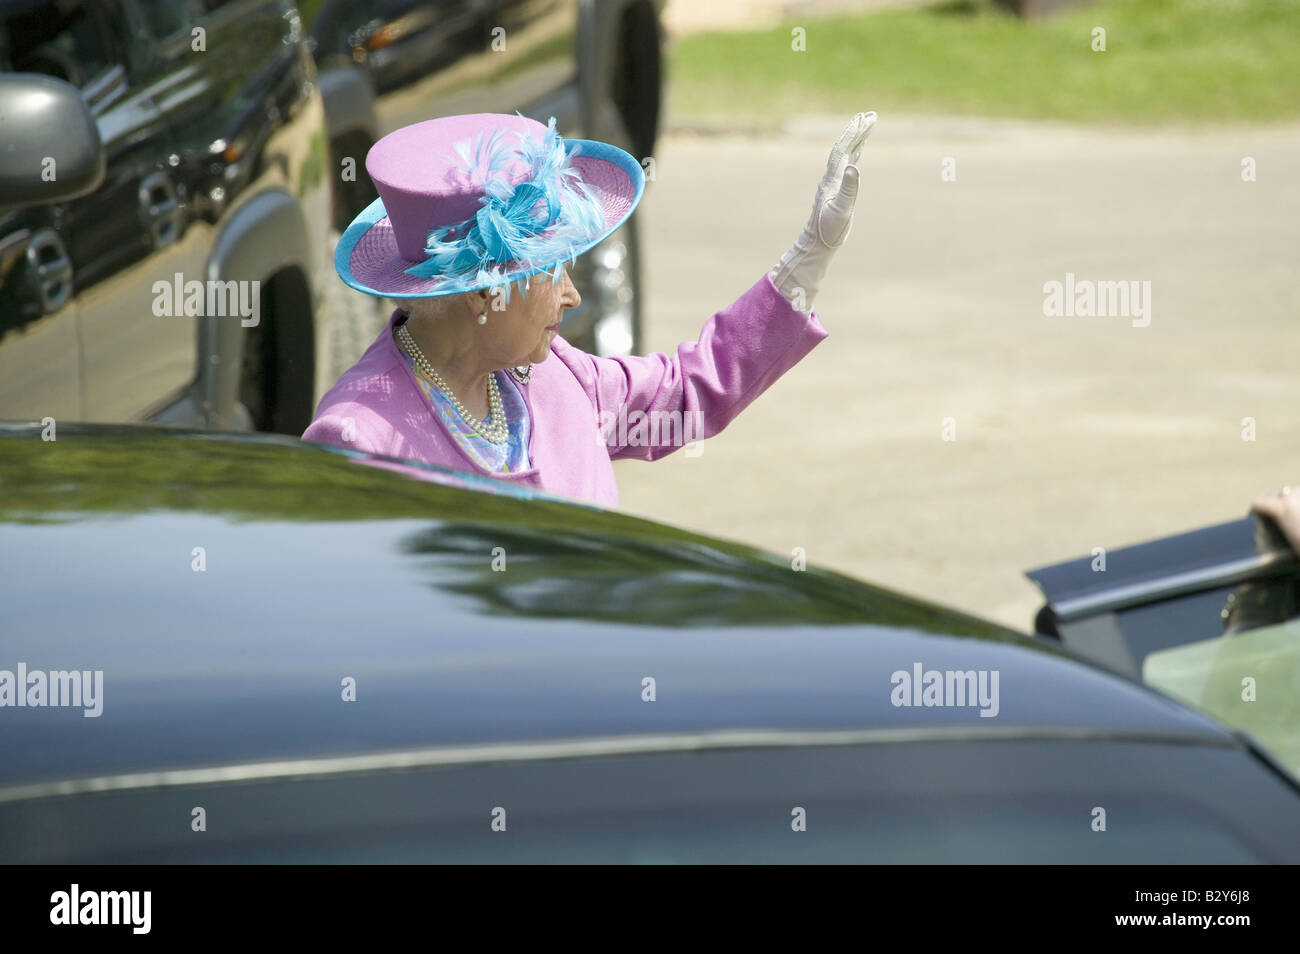 Queen Elizabeth II in bright purple outfit and hat, waving as she enters Presidential Limousine in Williamsburg VA Stock Photo